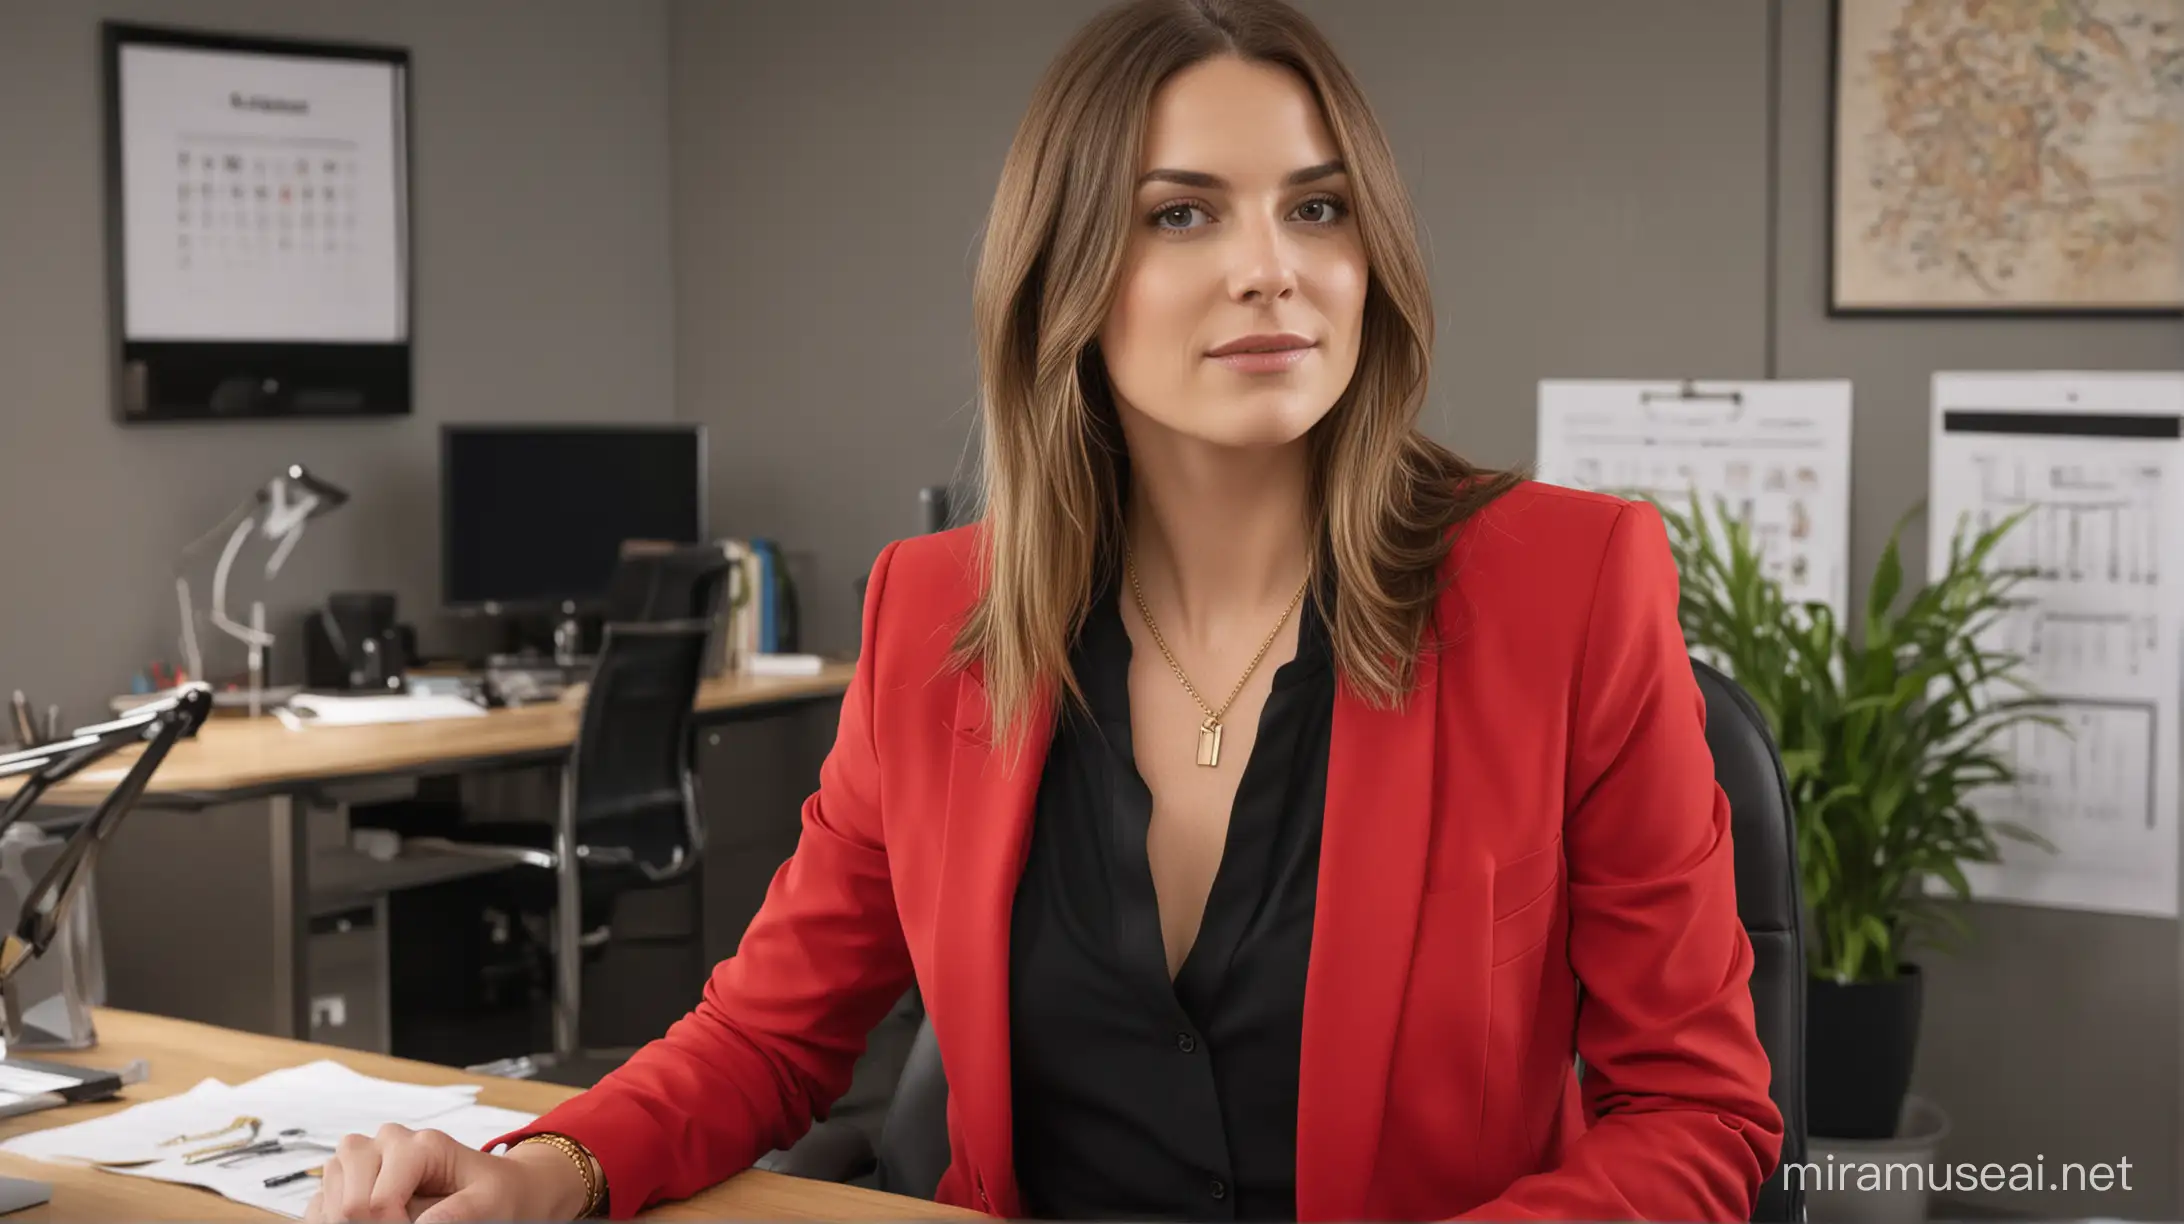 30 year old white female with long brown hair parted to the right seated at a desk in an office background, she is wearing a red blazer, low cut black shirt and black pants. She is also wearing a simple gold necklace.